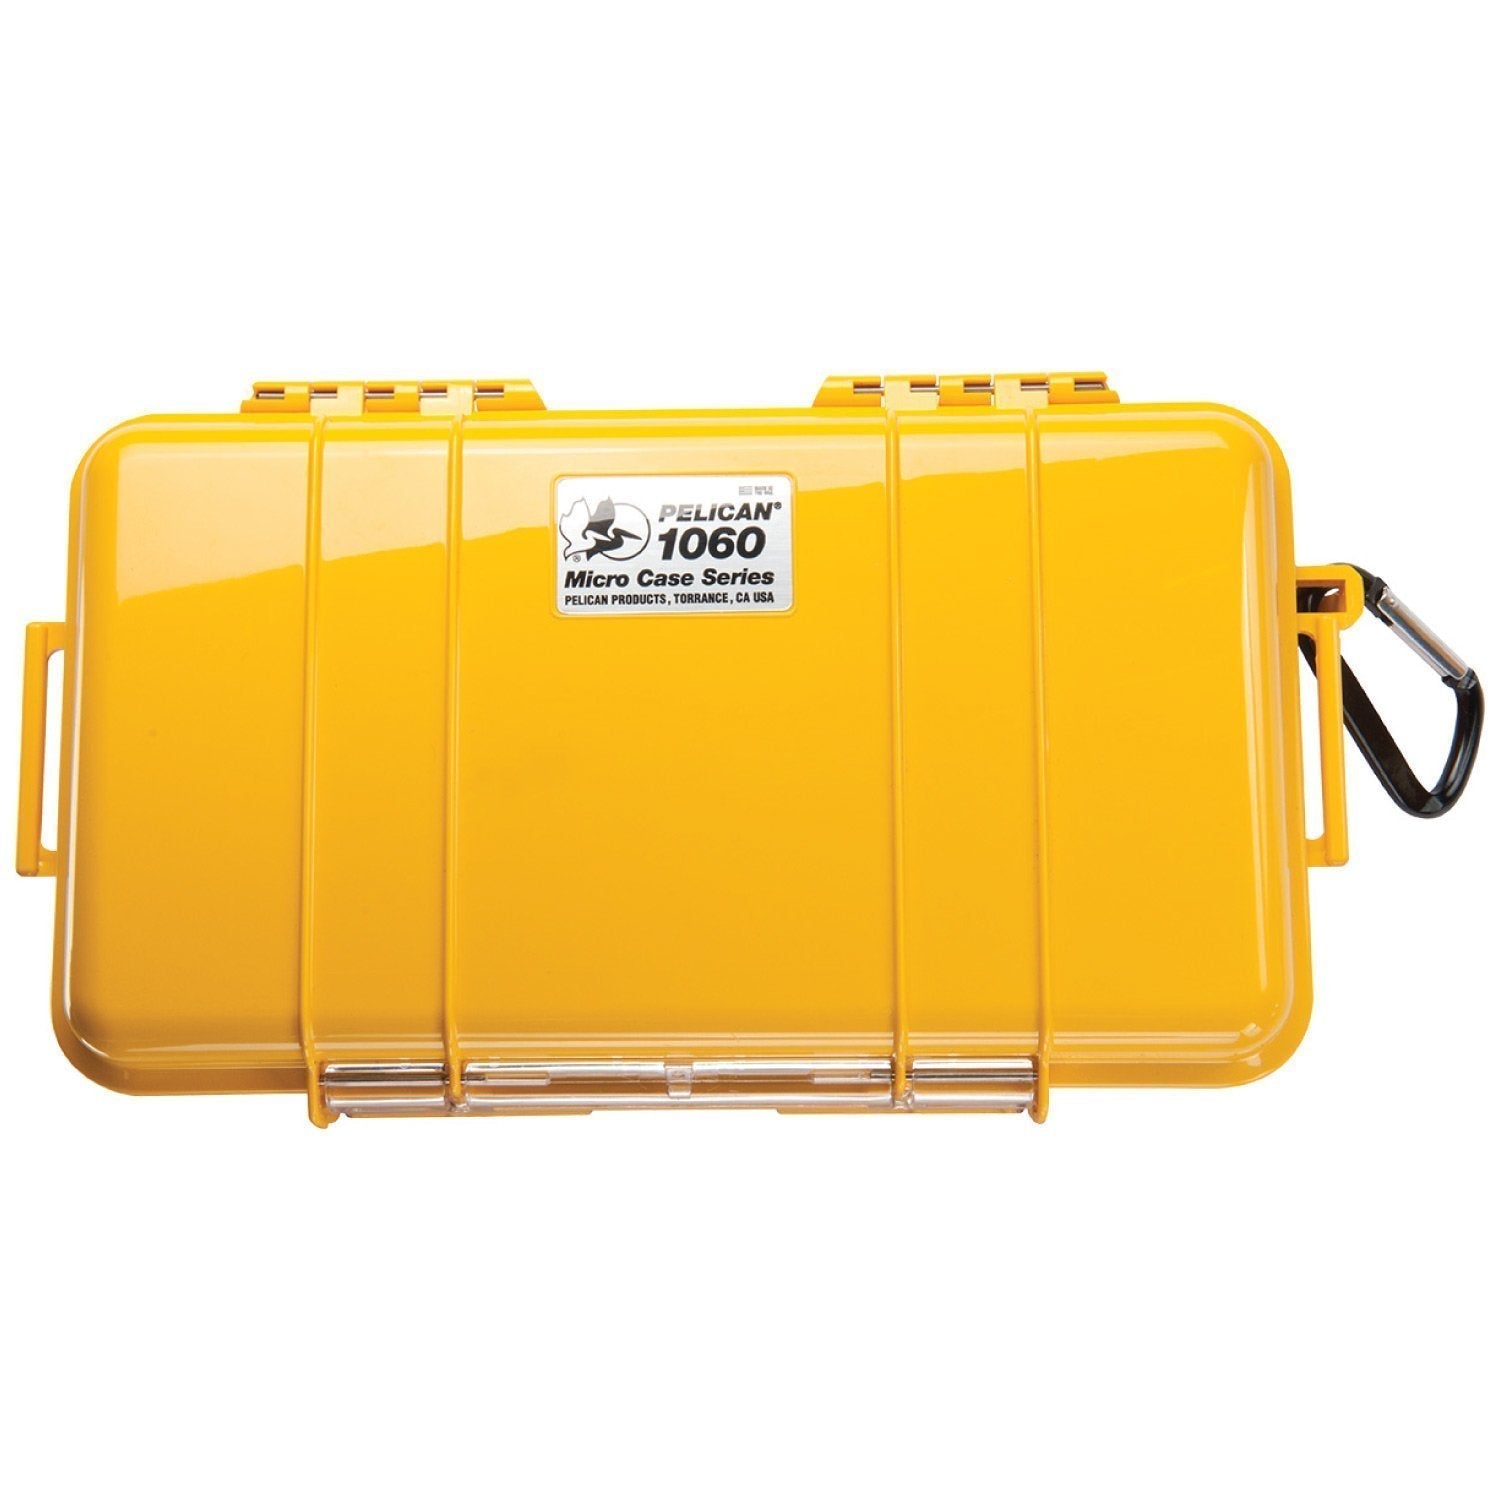 Pelican 1060 Micro Case Cases Pelican Products Yellow Shell with Black Liner Tactical Gear Supplier Tactical Distributors Australia